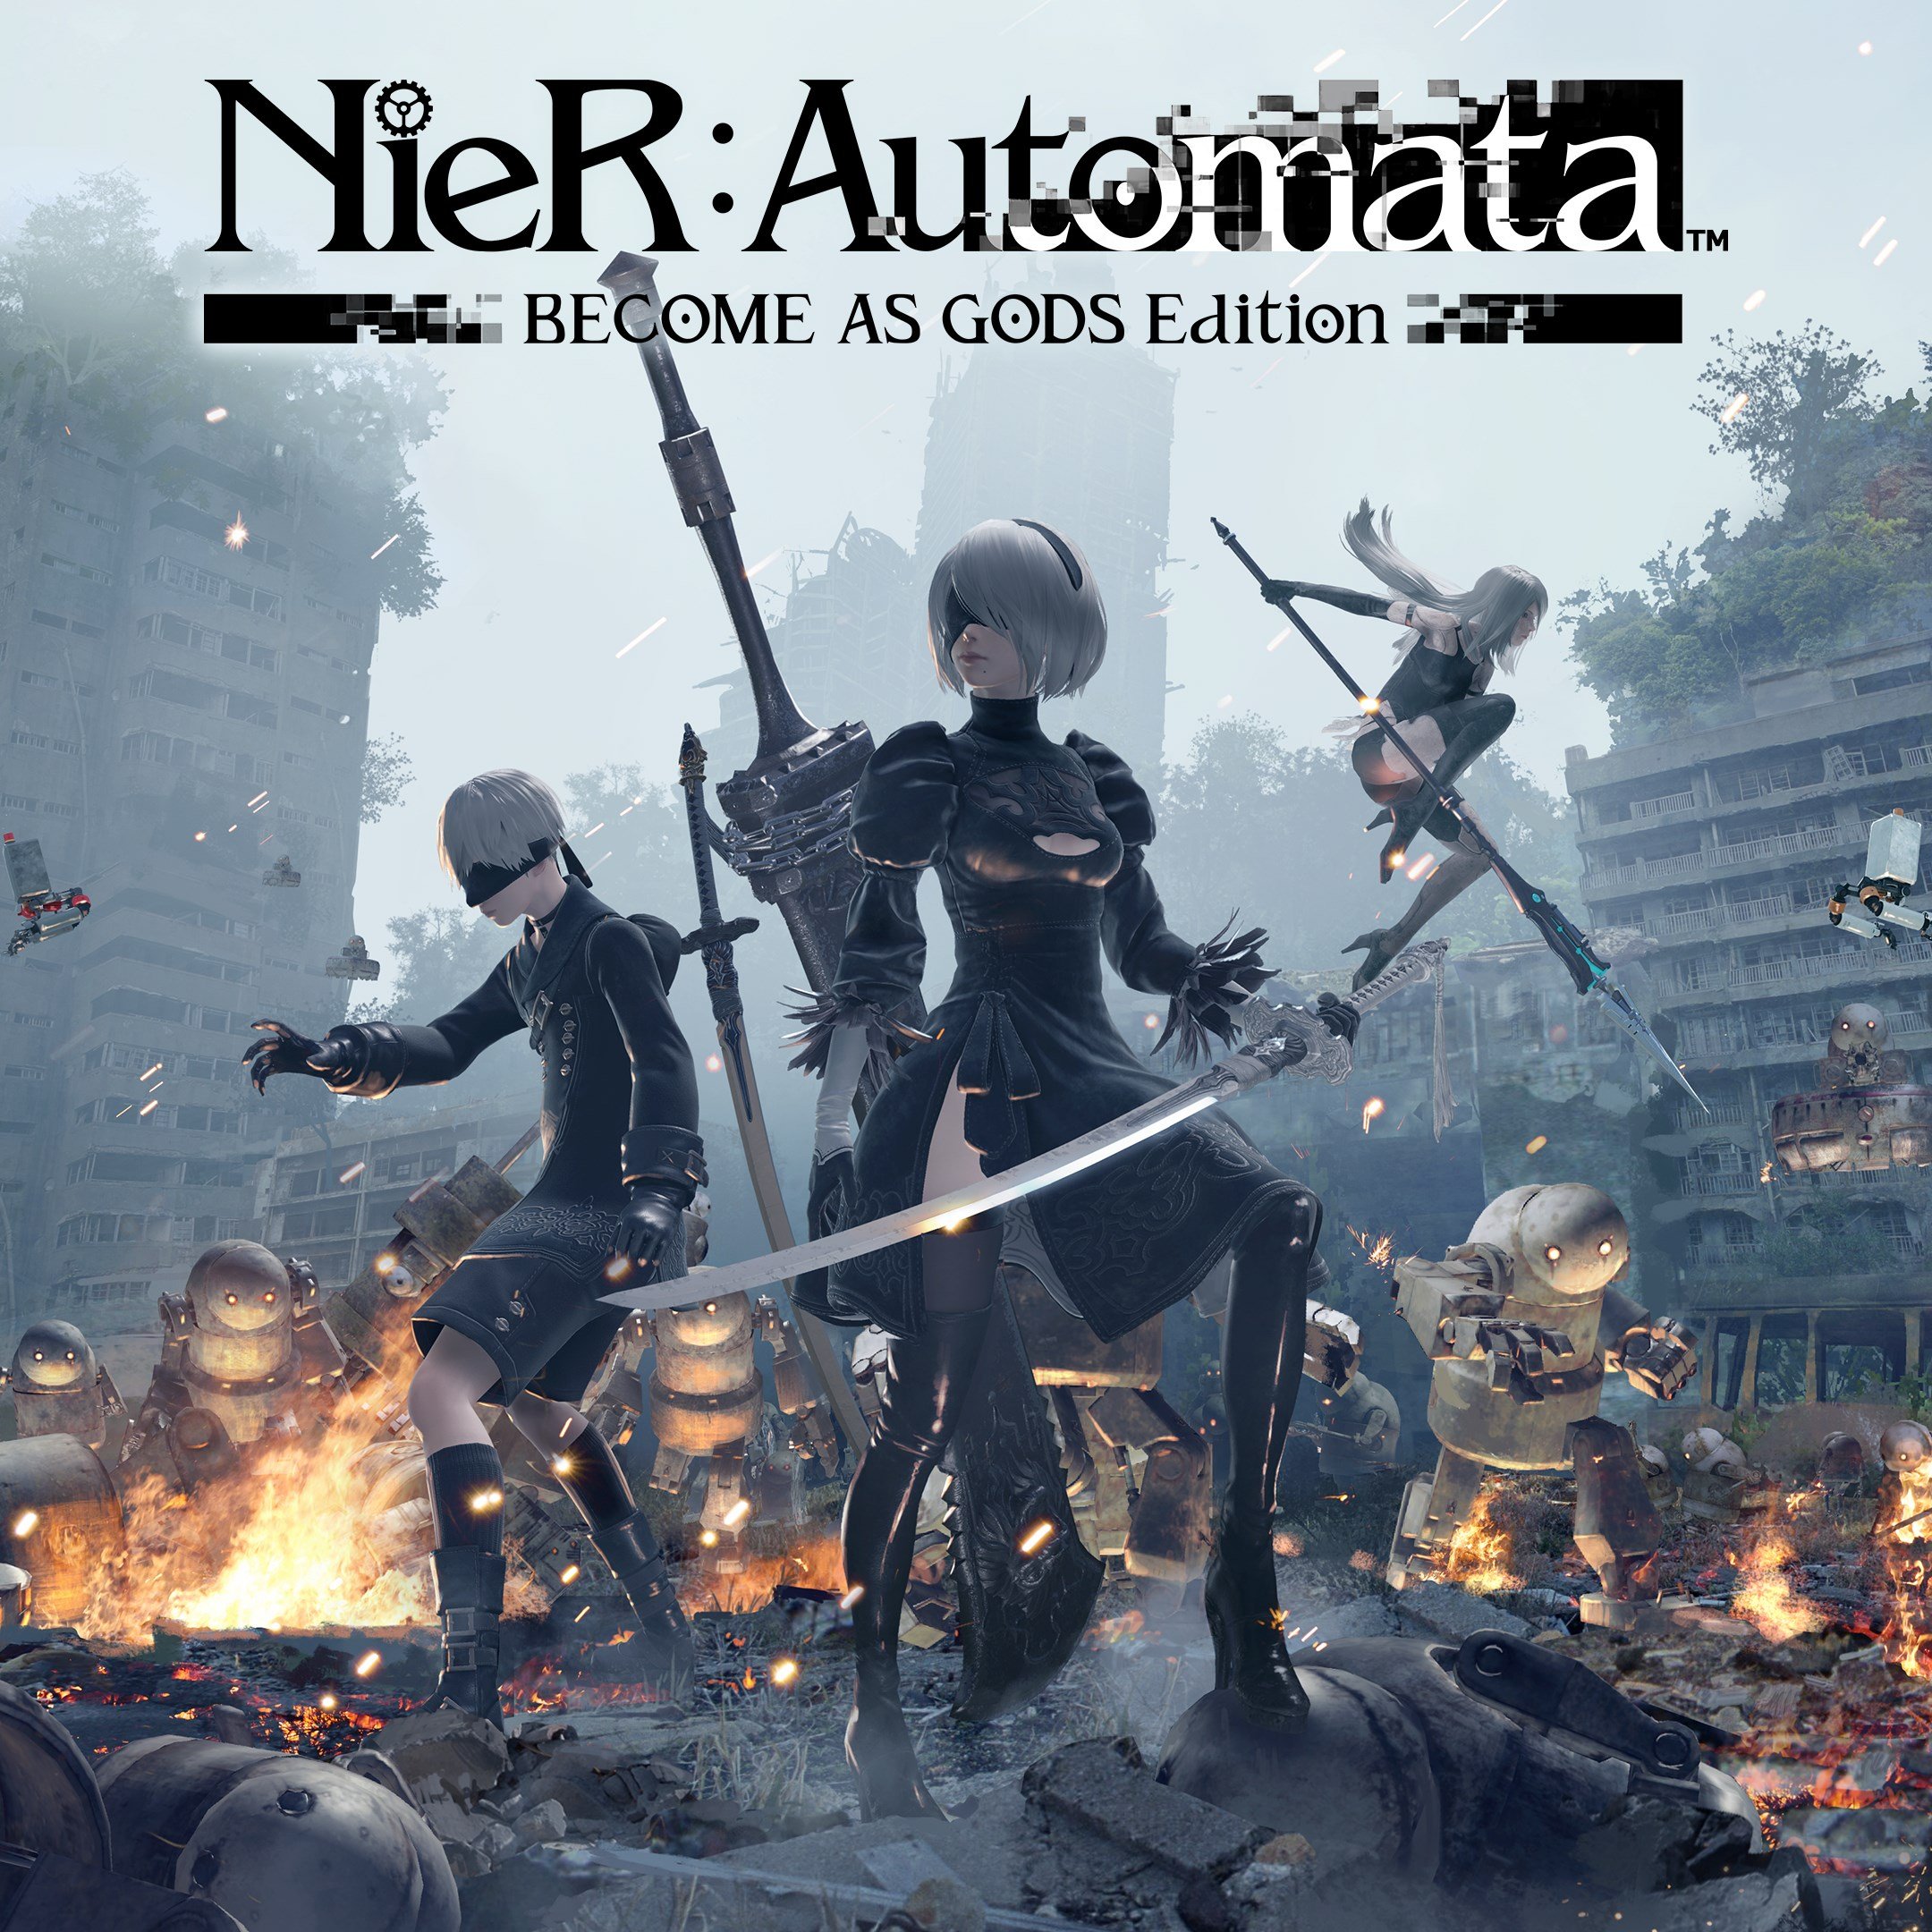 Boxart for NieR:Automata™ BECOME AS GODS Edition